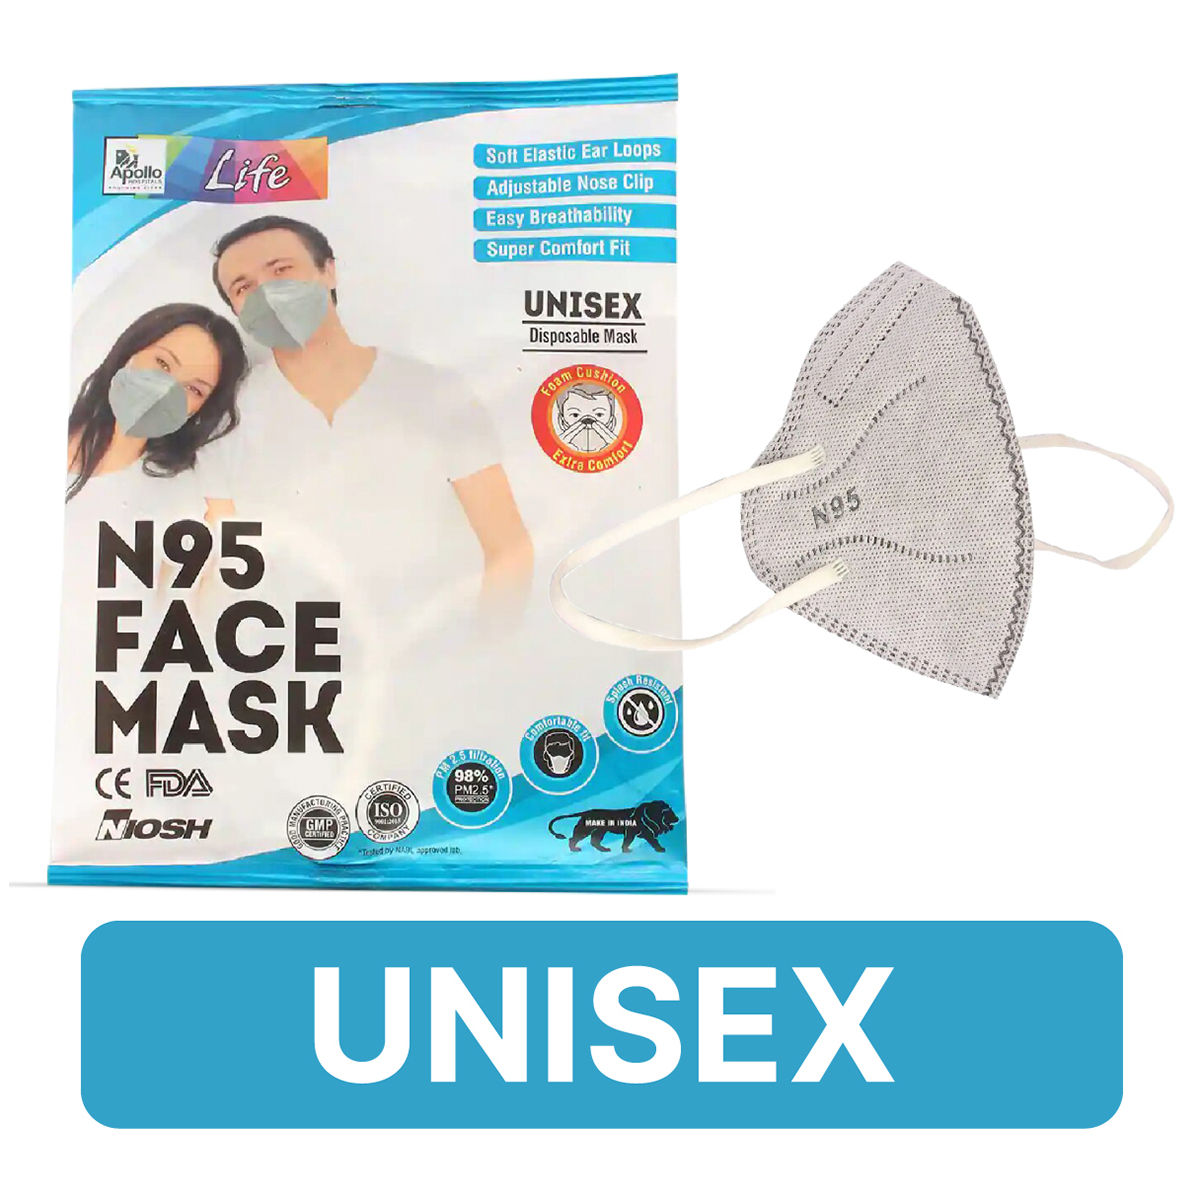 Buy Apollo Life N95 Unisex Face Mask, 5 Count Online